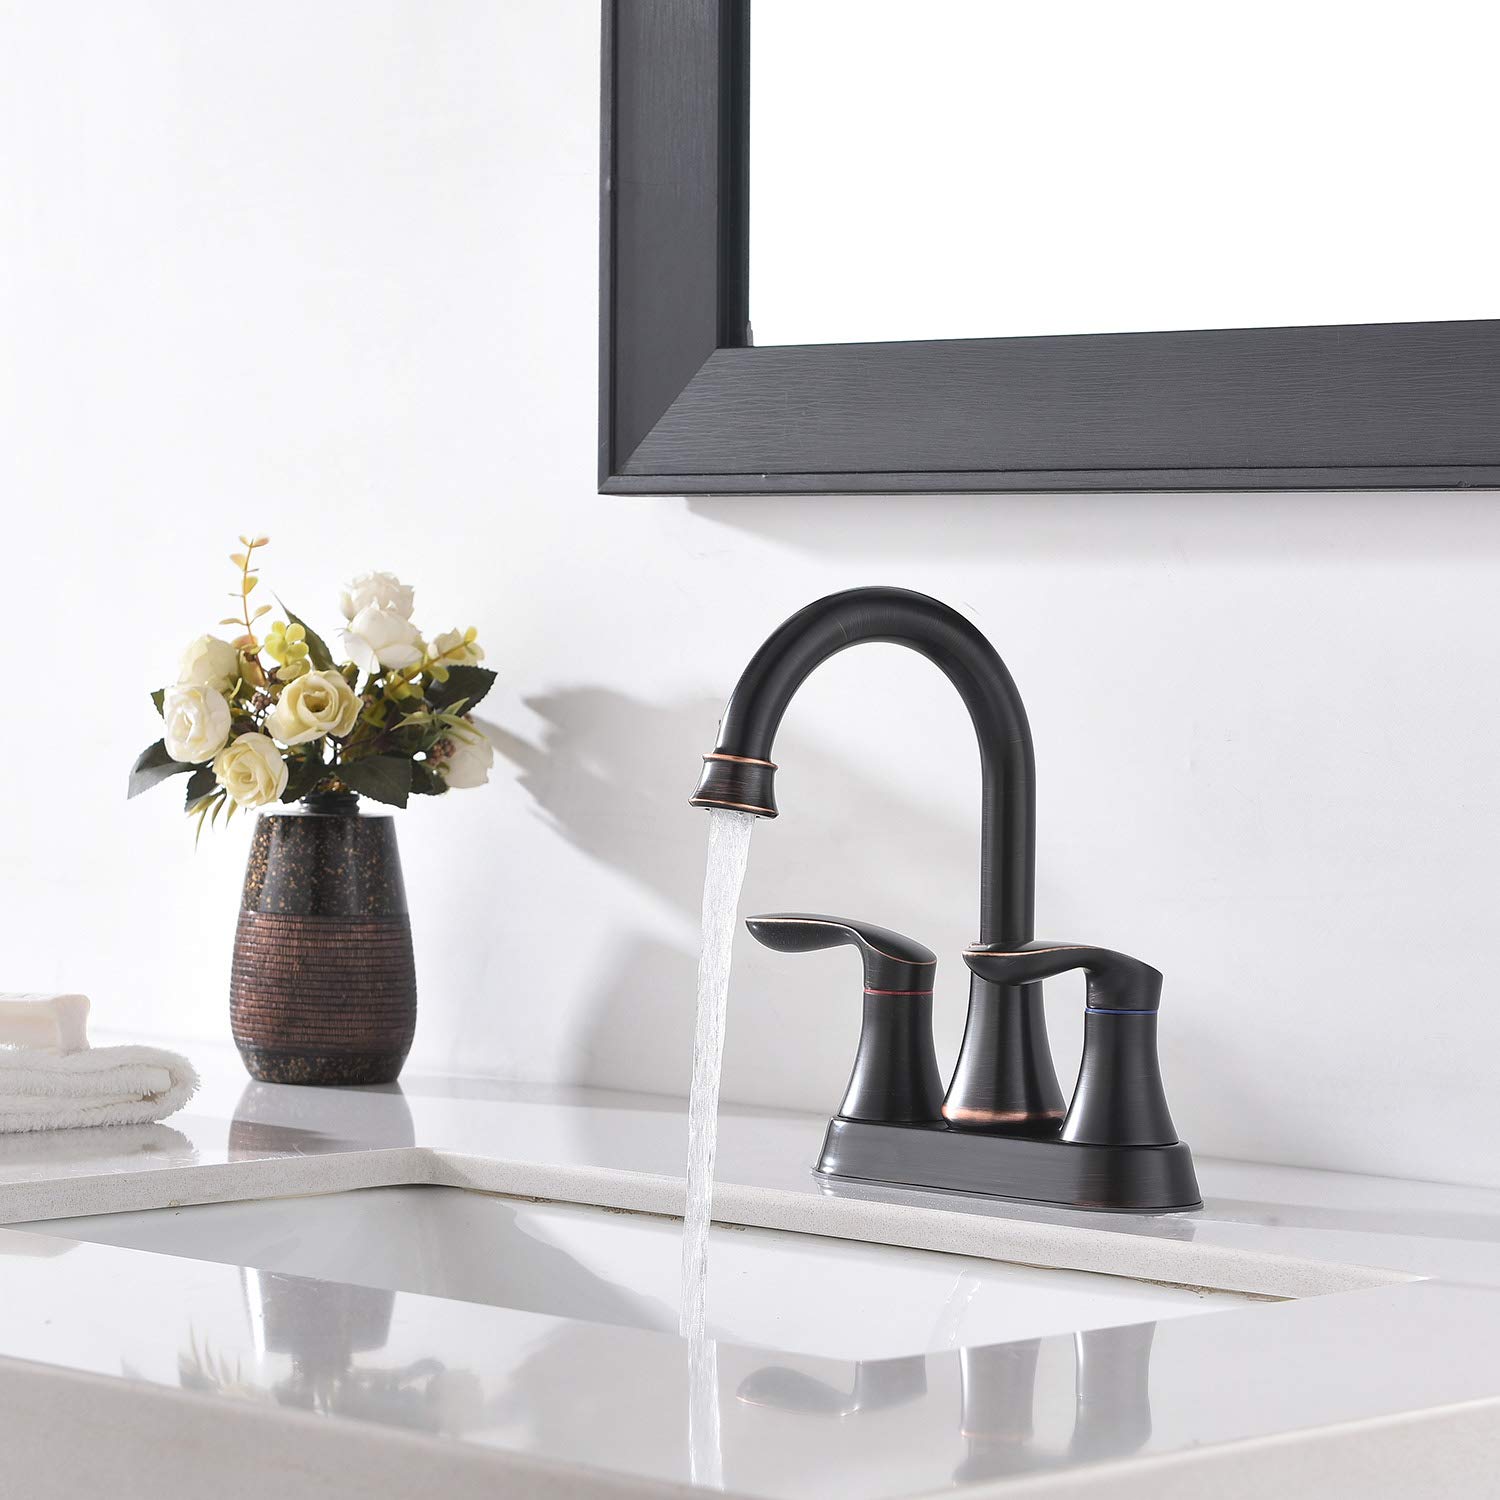 Friho Lead-Free Modern Commercial Two Handle Oil Rubbed Bronze Bathroom Faucet,Bathroom Vanity Sink Faucets with Drain Stopper and Water Hoses